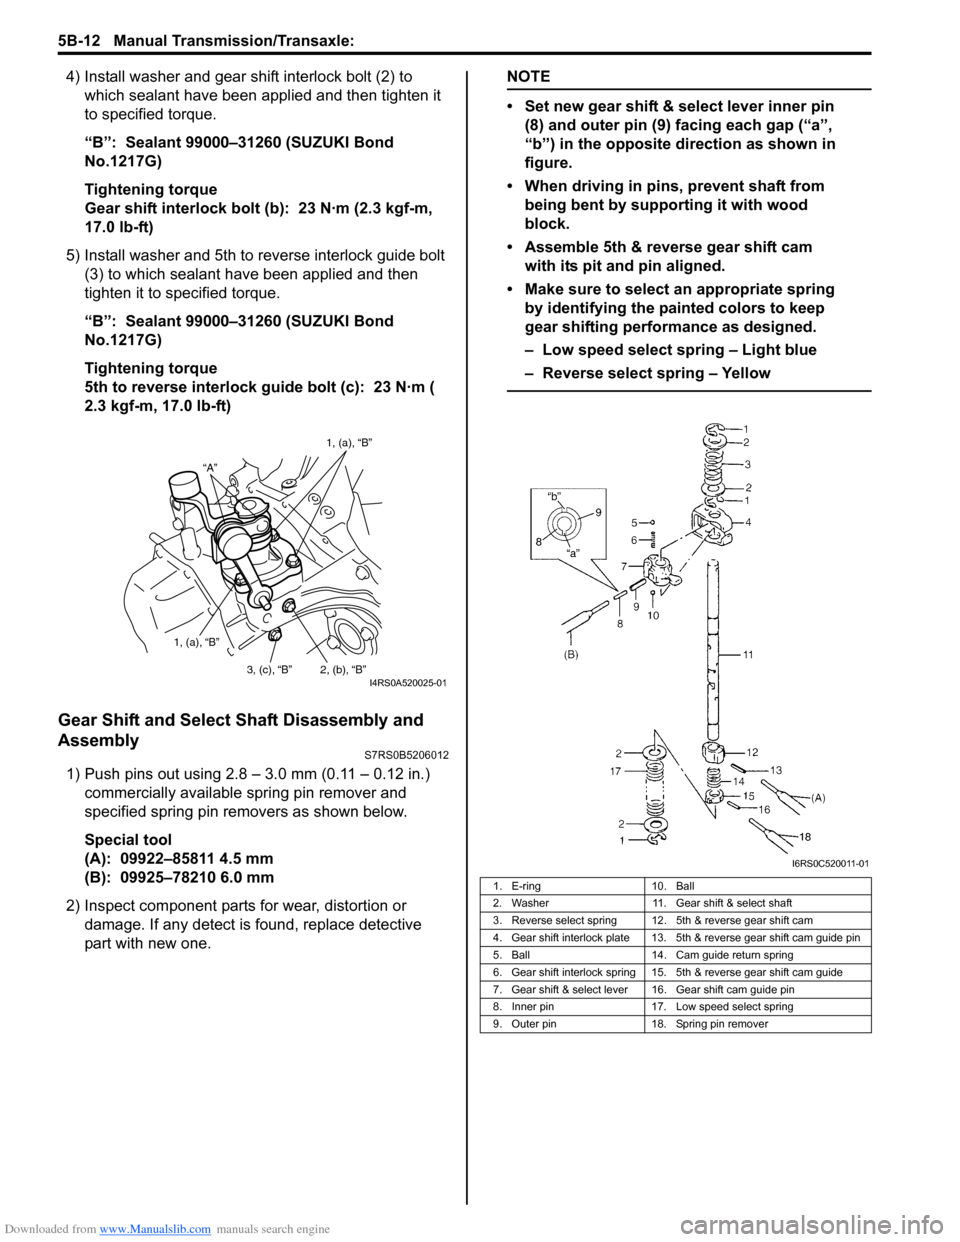 SUZUKI SWIFT 2006 2.G Service Workshop Manual Downloaded from www.Manualslib.com manuals search engine 5B-12 Manual Transmission/Transaxle: 
4) Install washer and gear shift interlock bolt (2) to which sealant have been app lied and then tighten 